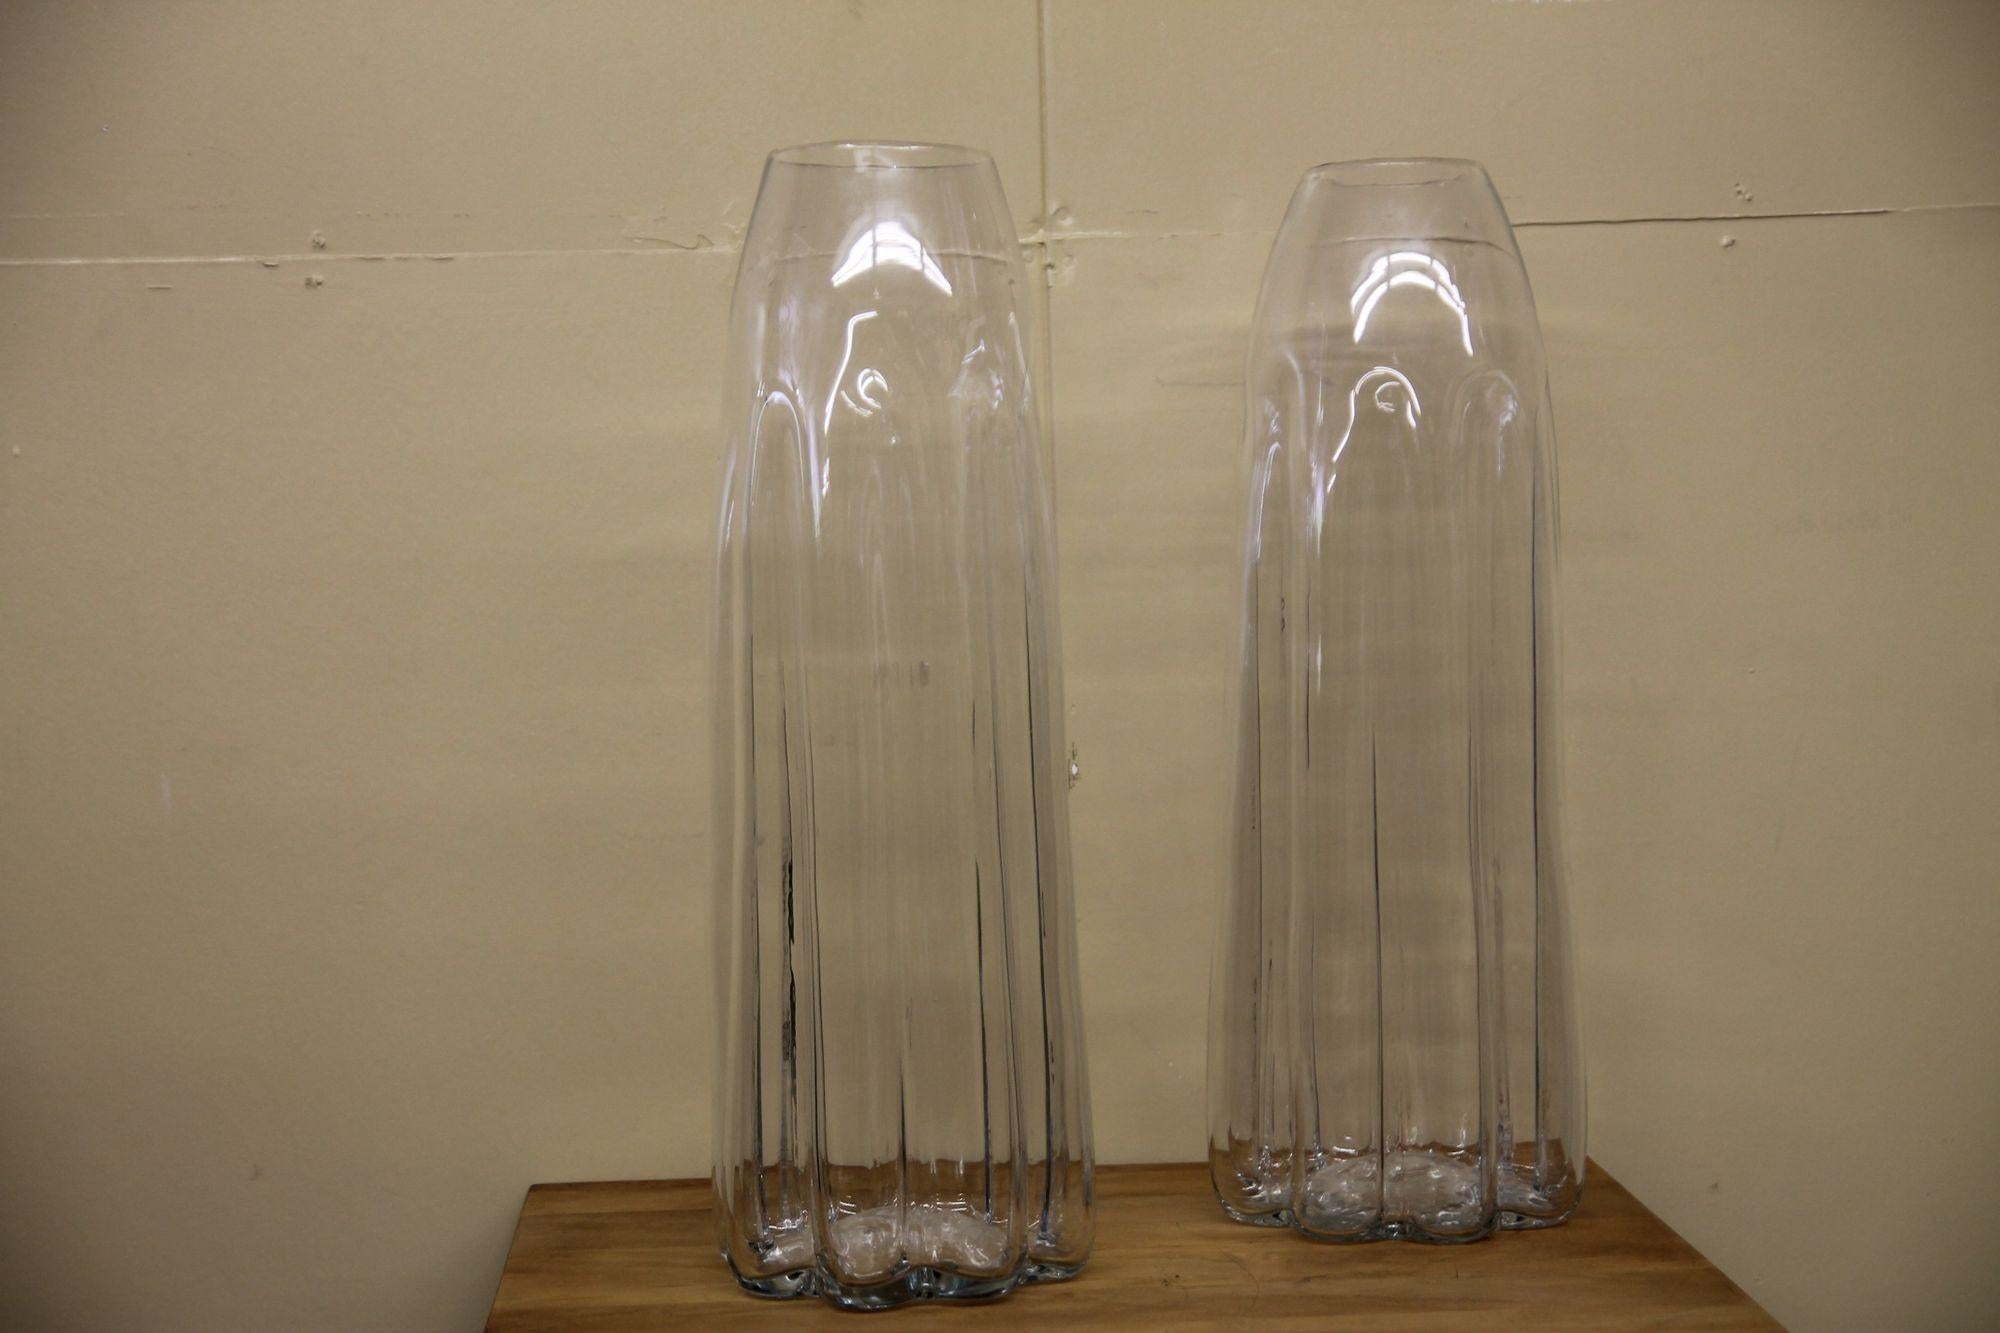 Pleased too offer this great pair of hand blown large vases. The top opening are slightly different but that is to be expected with a hand made piece. These oversized vases will look great on a table as well as the floor.